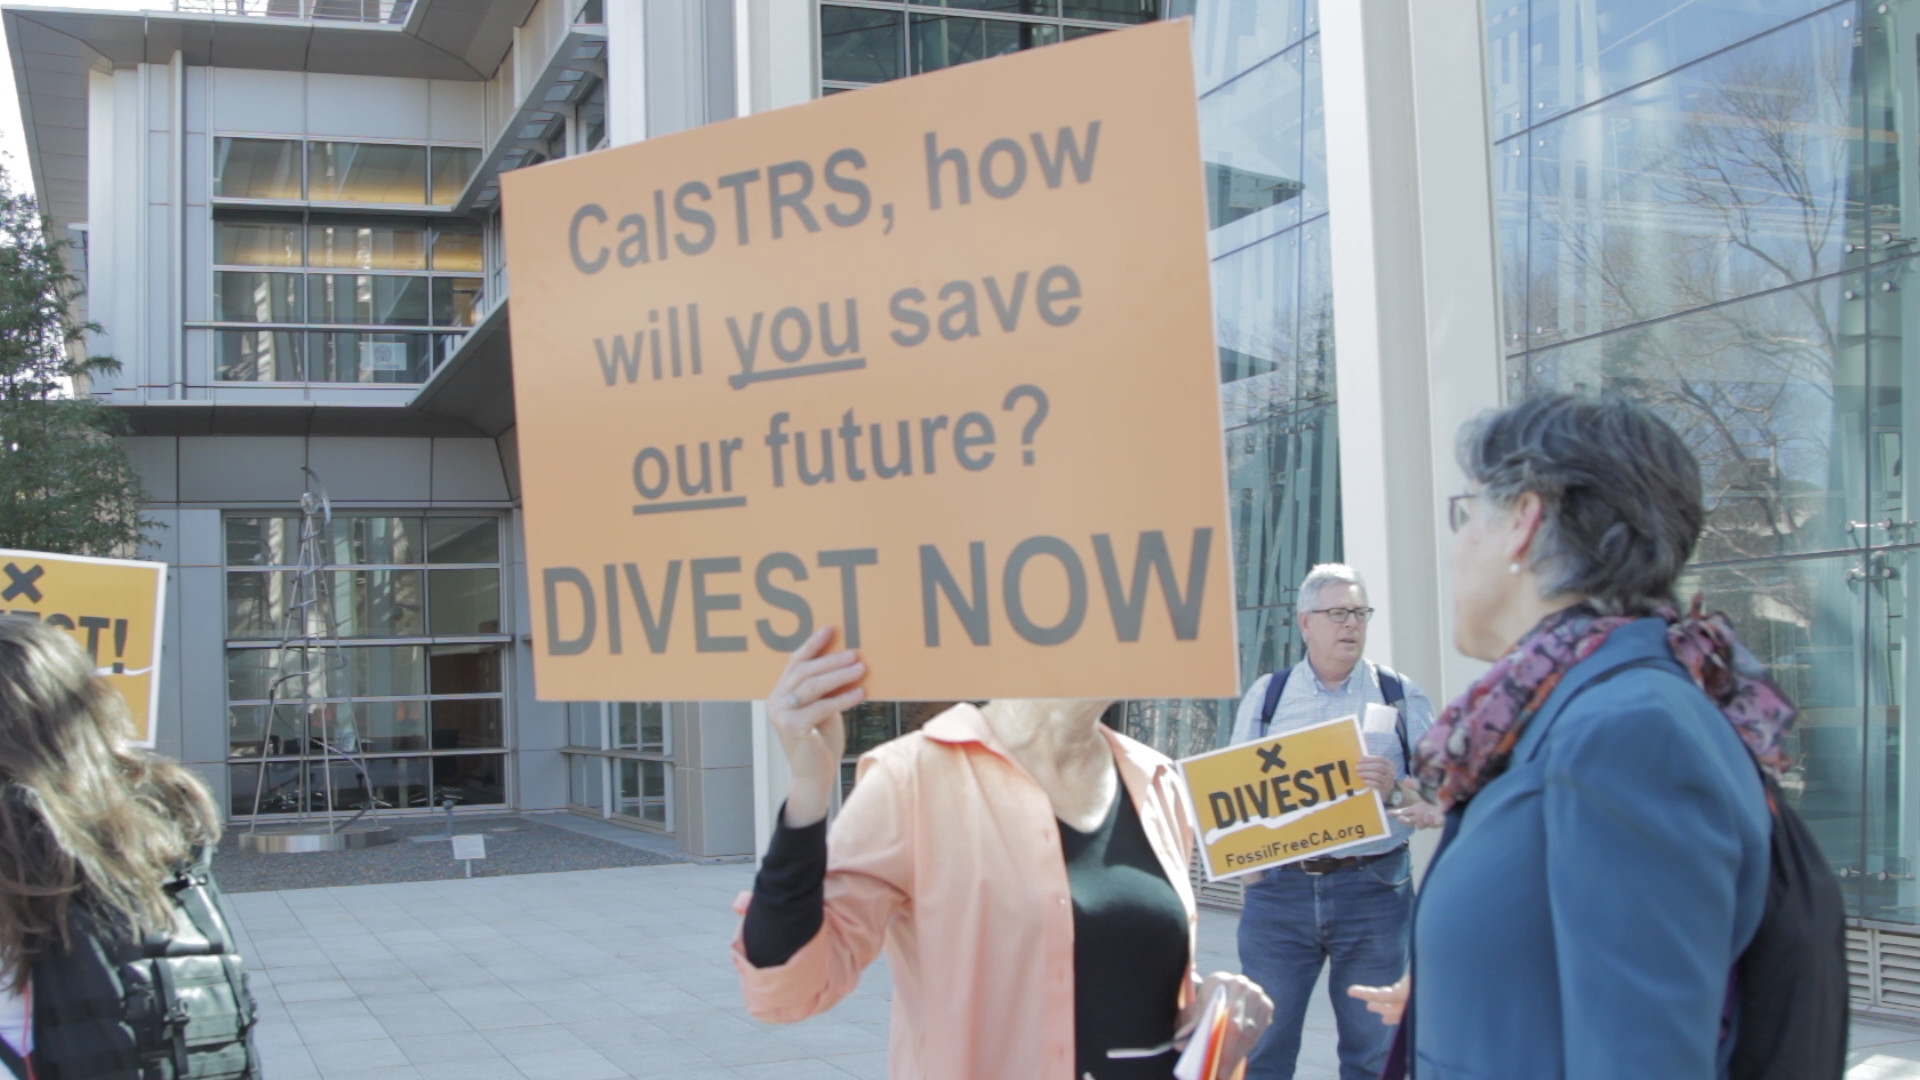 Protester with sign about CAlSTRS divesting from fossil fuels